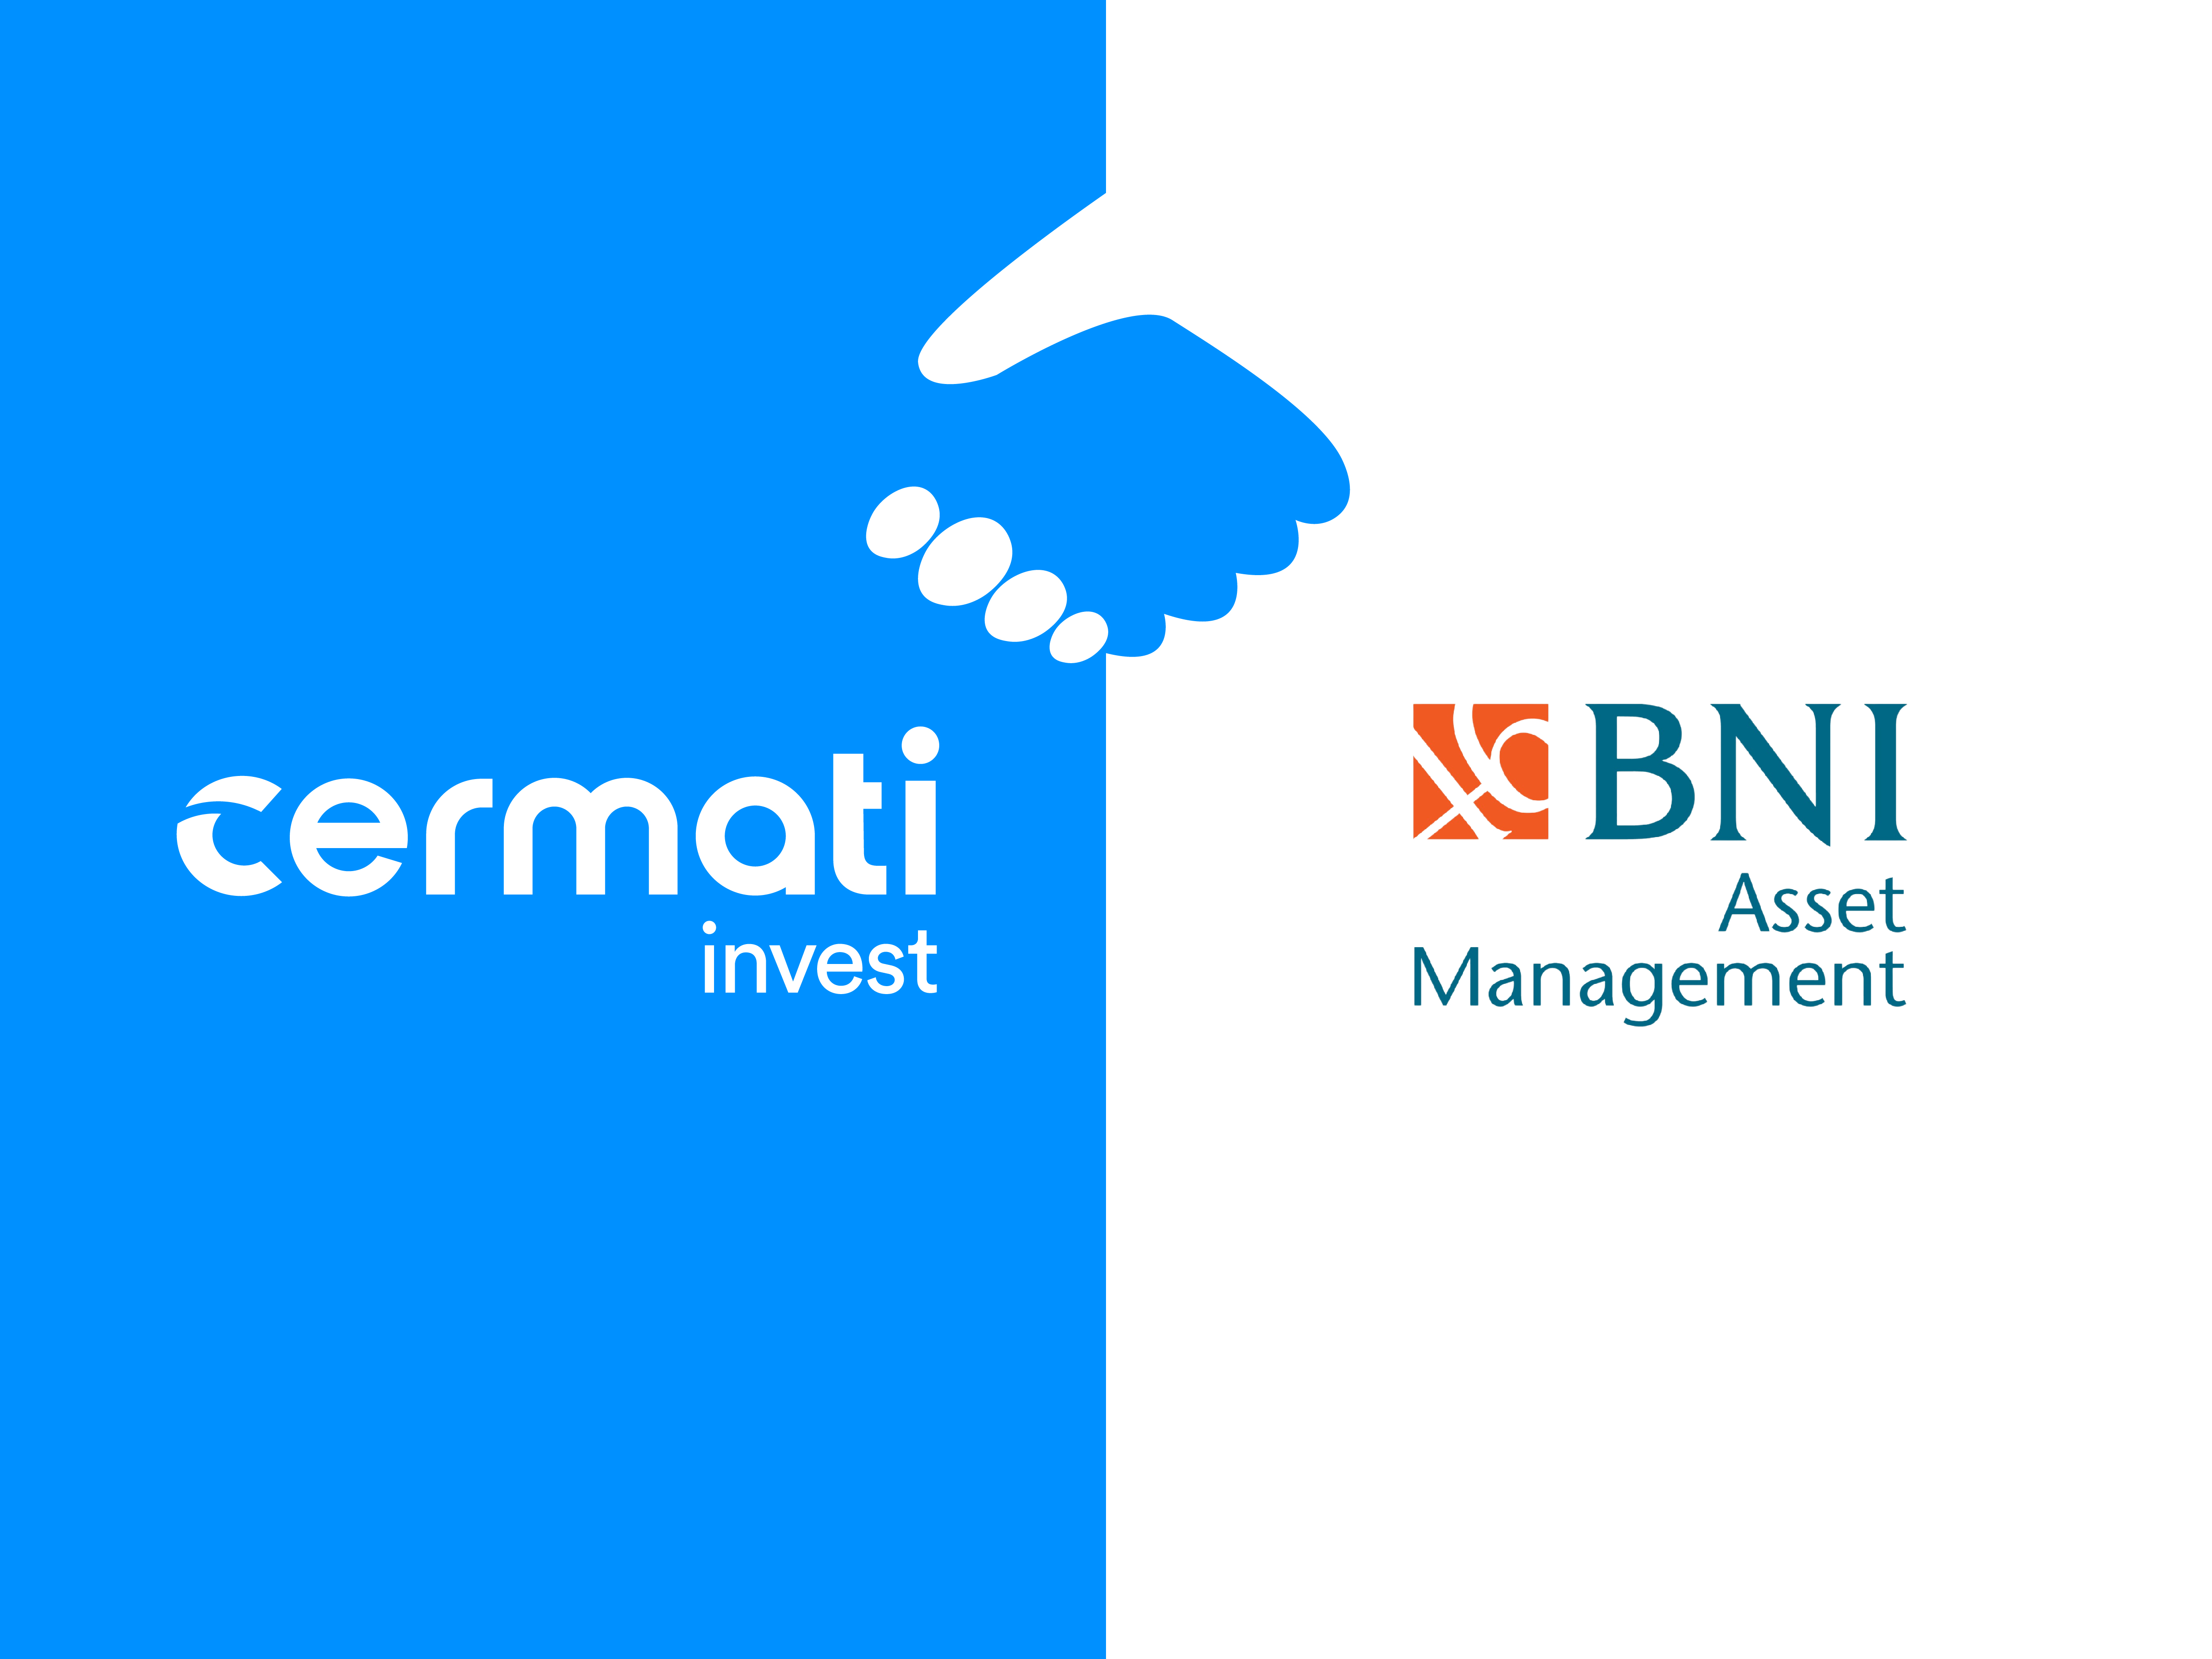 Targeting Retail Customers, Cermati Invest in Collaboration with BNI Asset Management